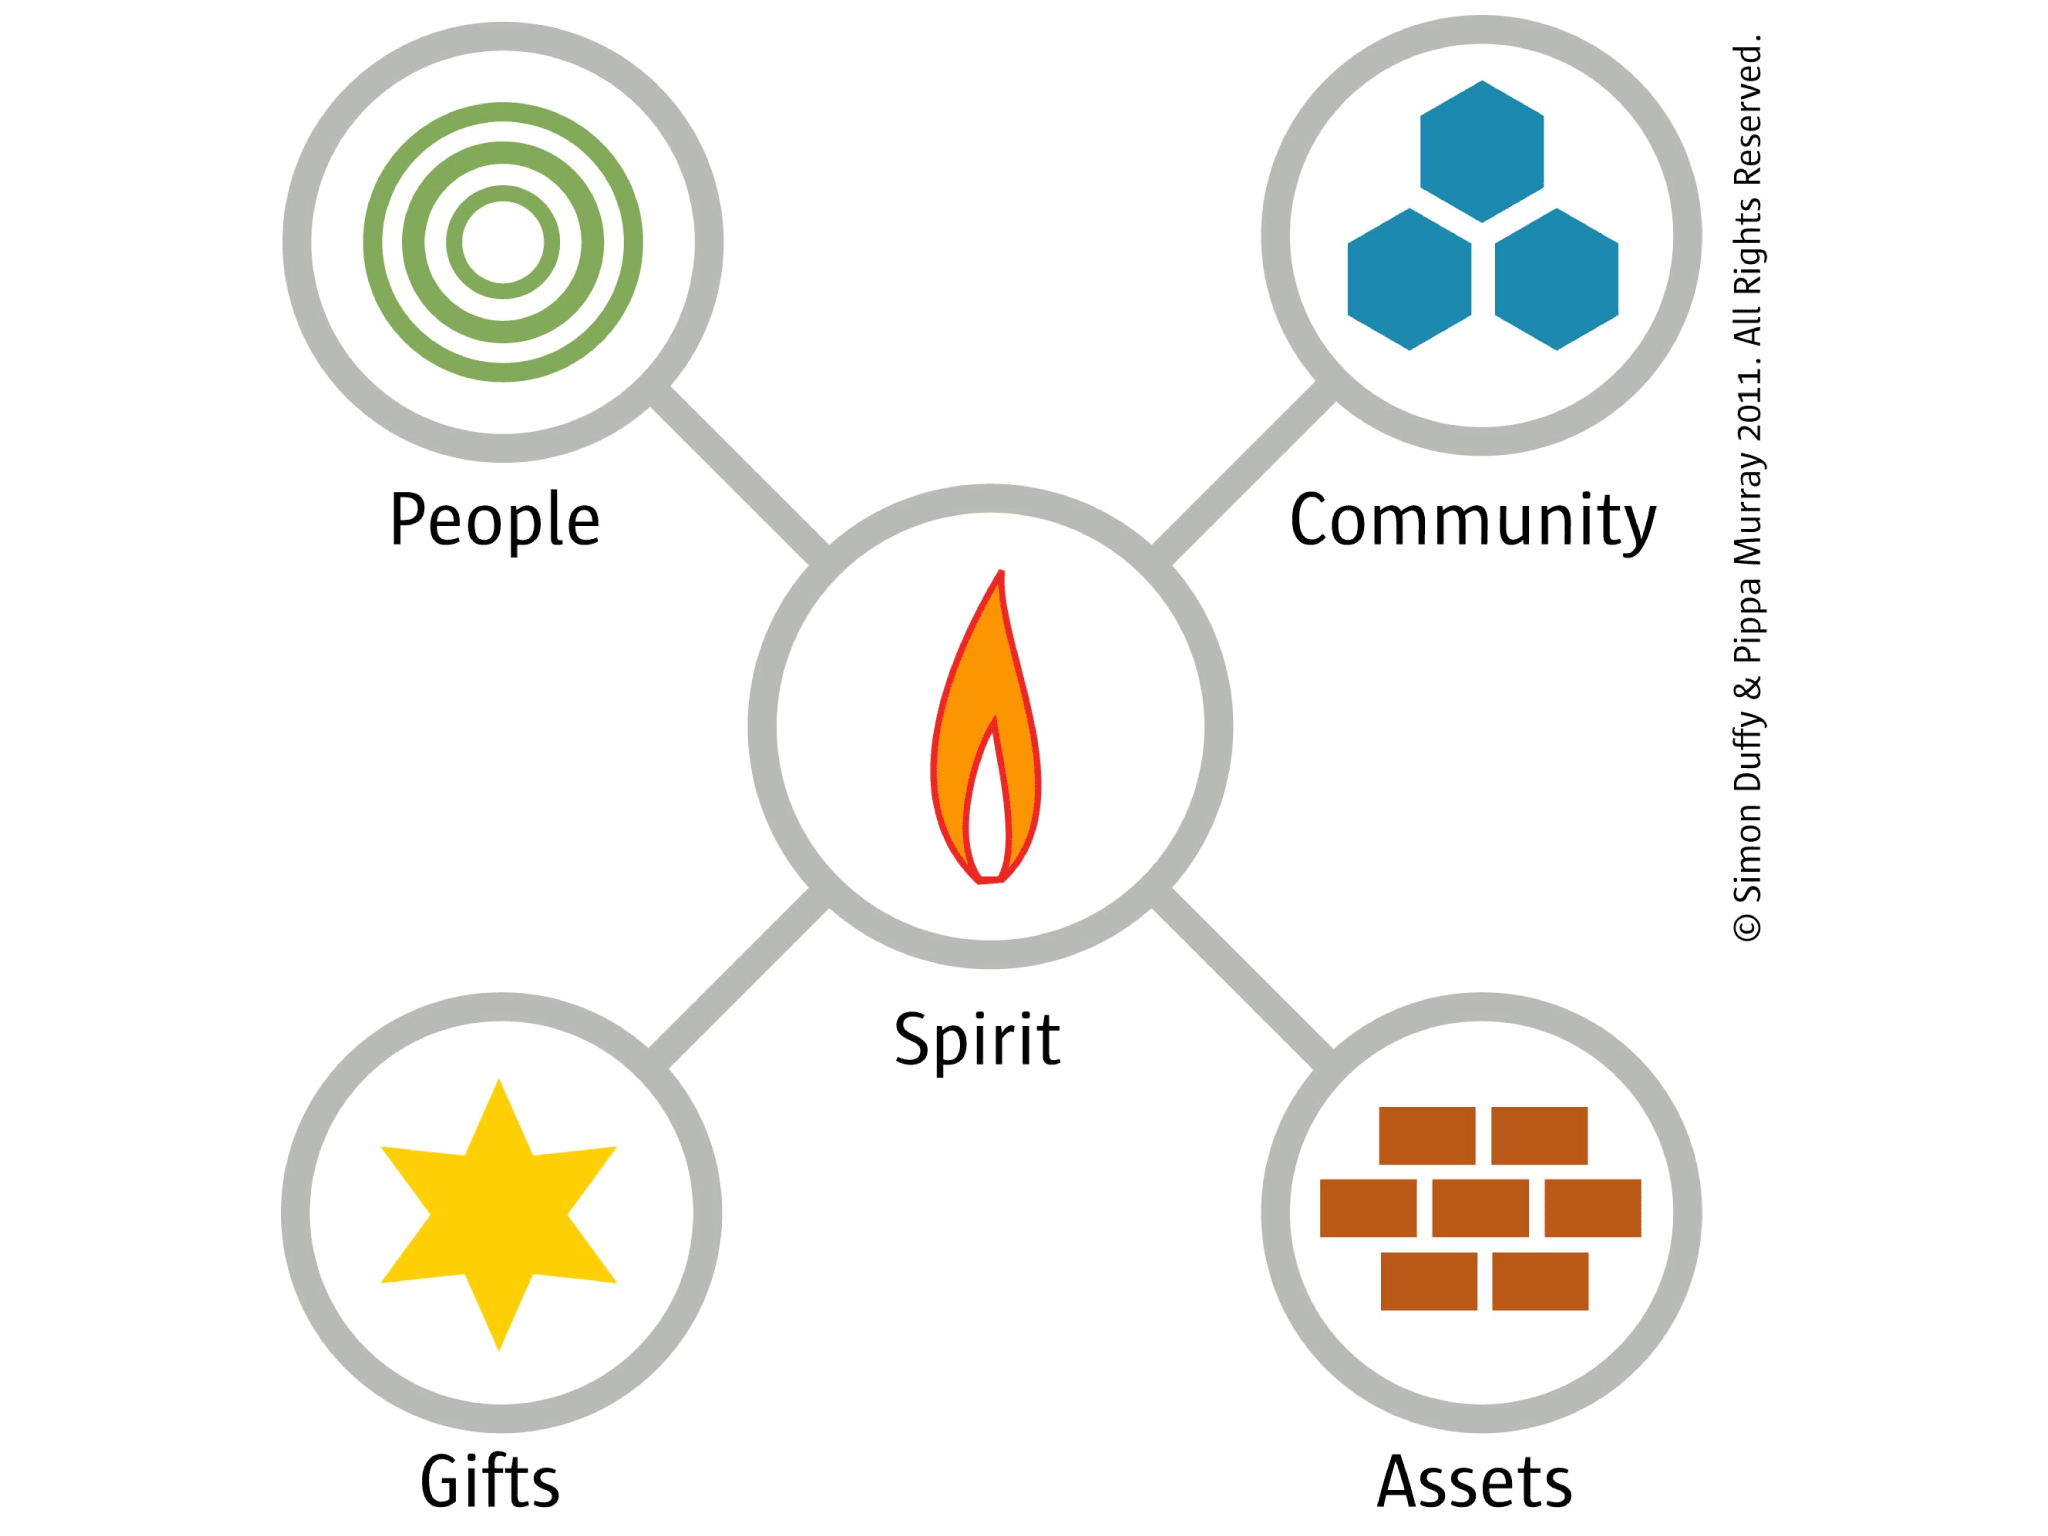 People, Community, Spirit, Gifts, Assets